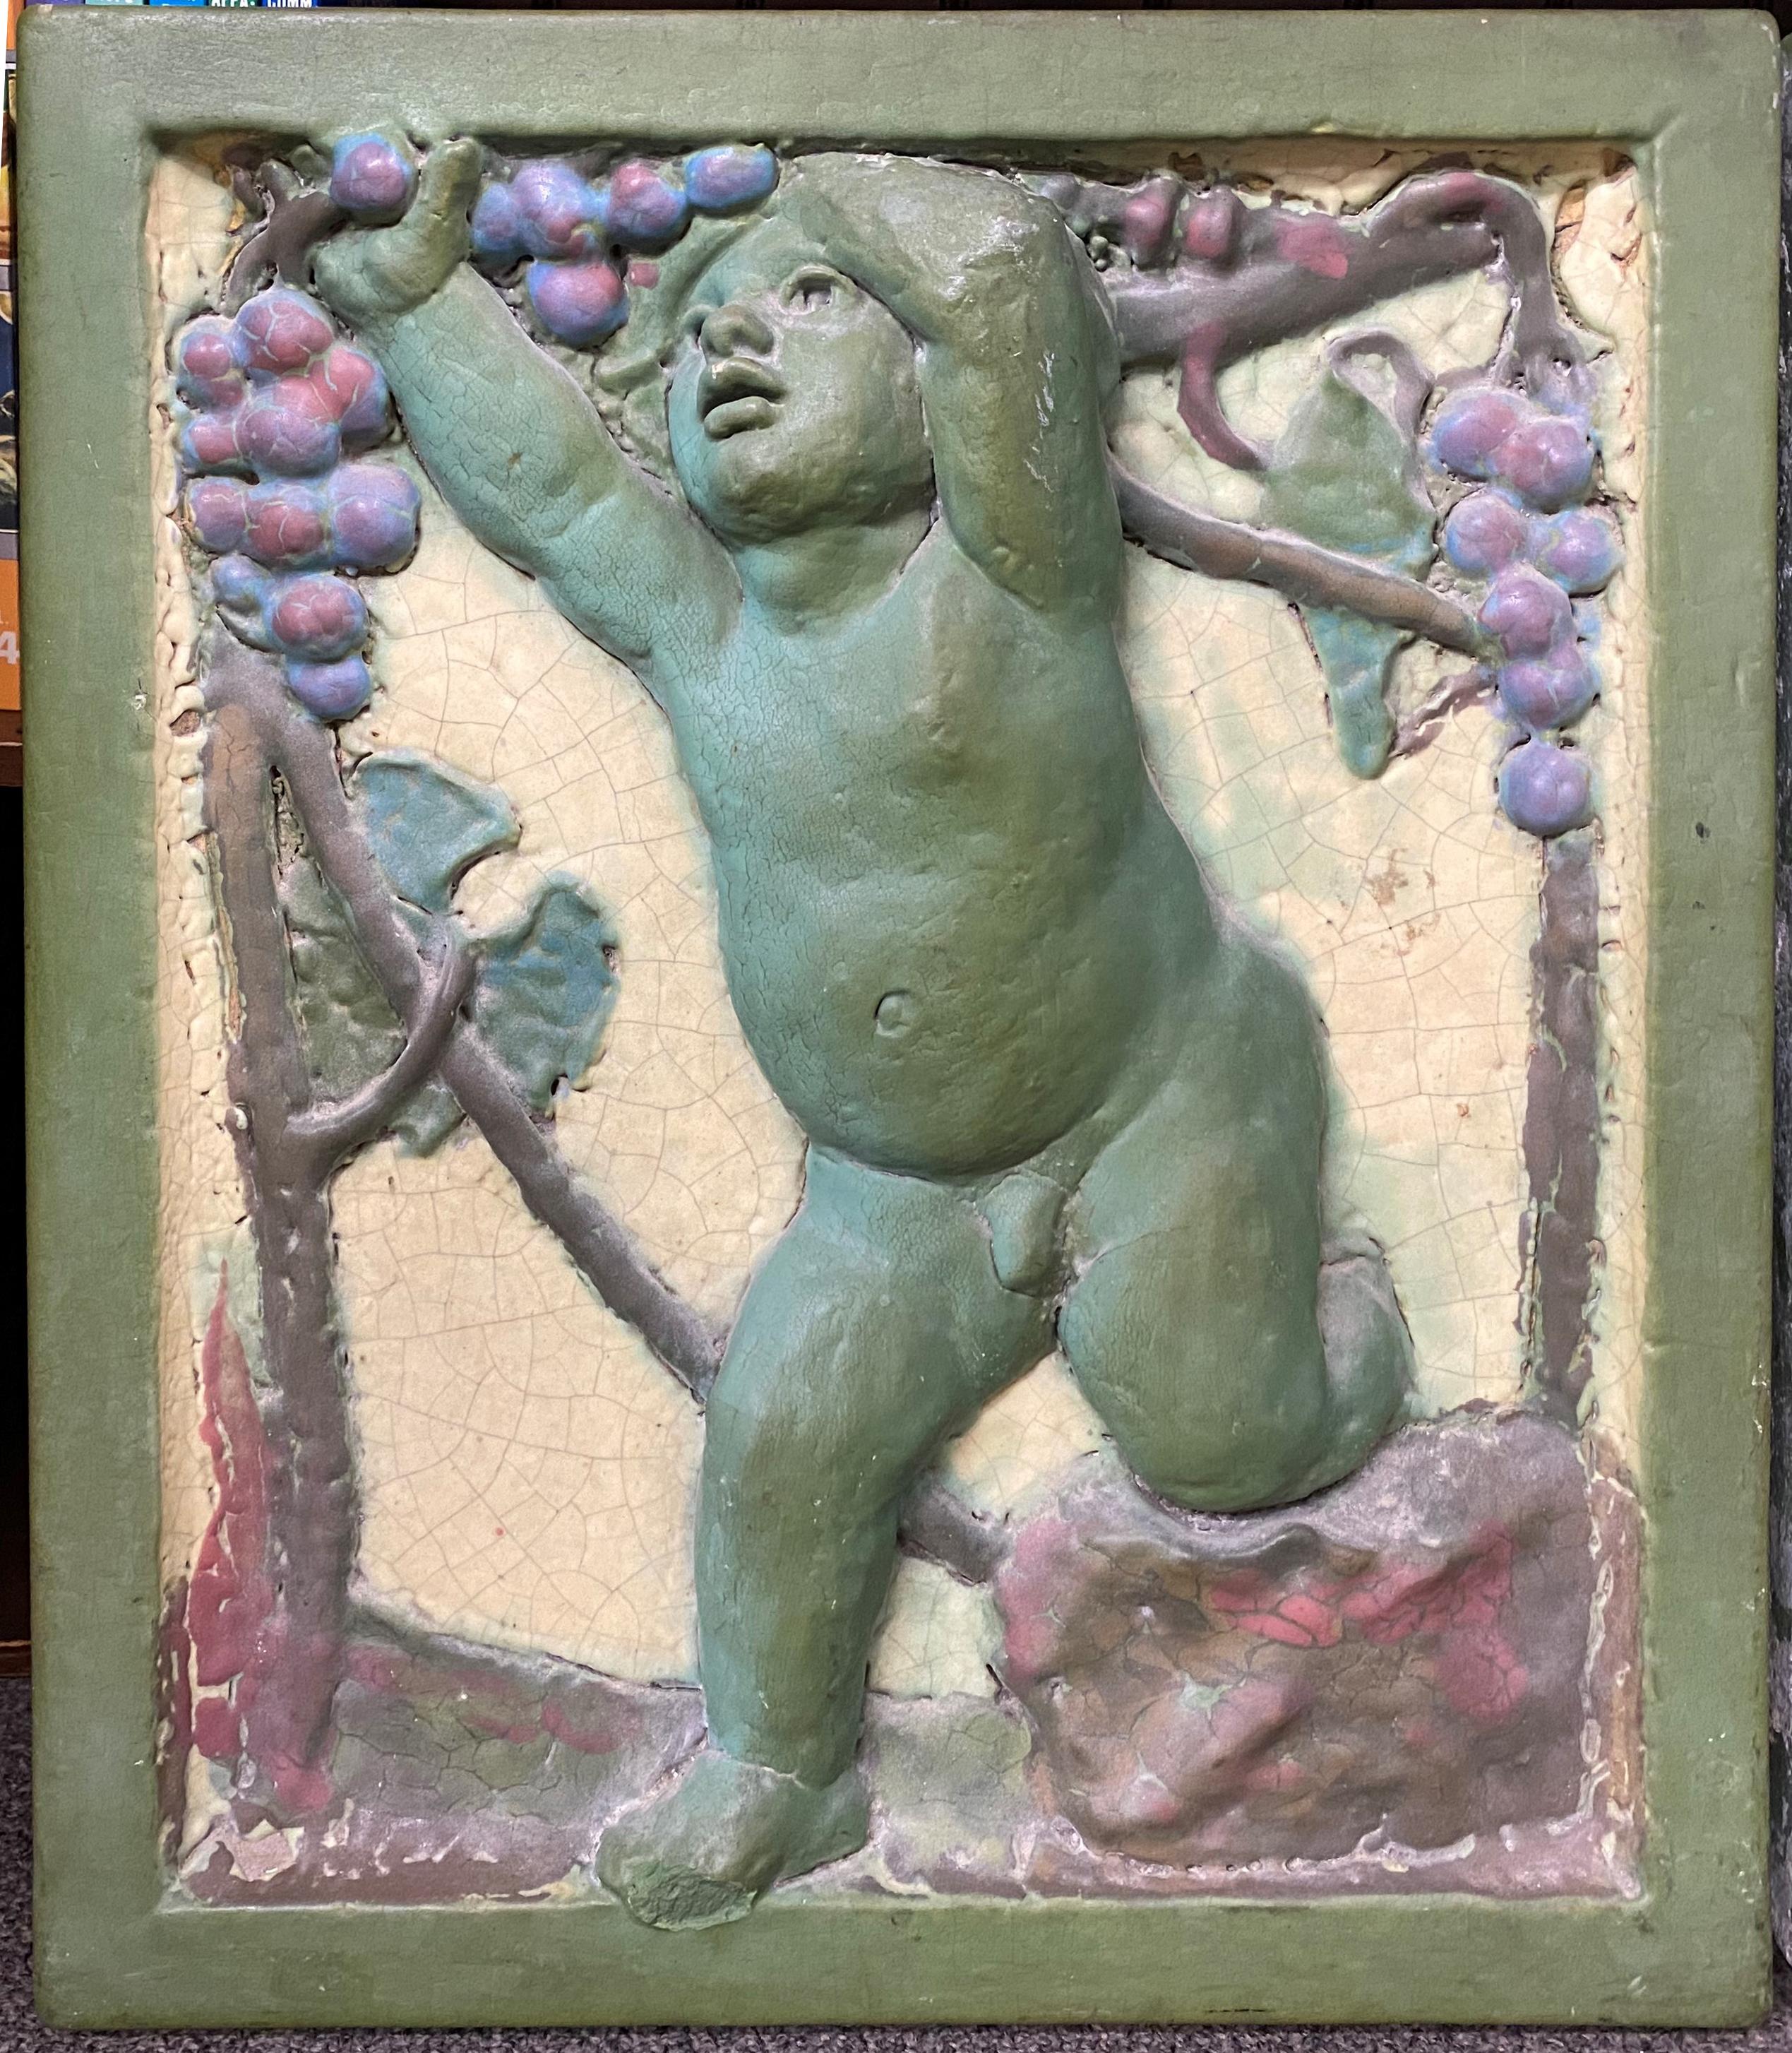 A fine pair of heavy cast polychrome architectural tiles featuring a single putto on each with a grape motif and green border, one dated 1921 on verso, and one illegibly stamped on verso. Probably English in origin, in very good overall condition,